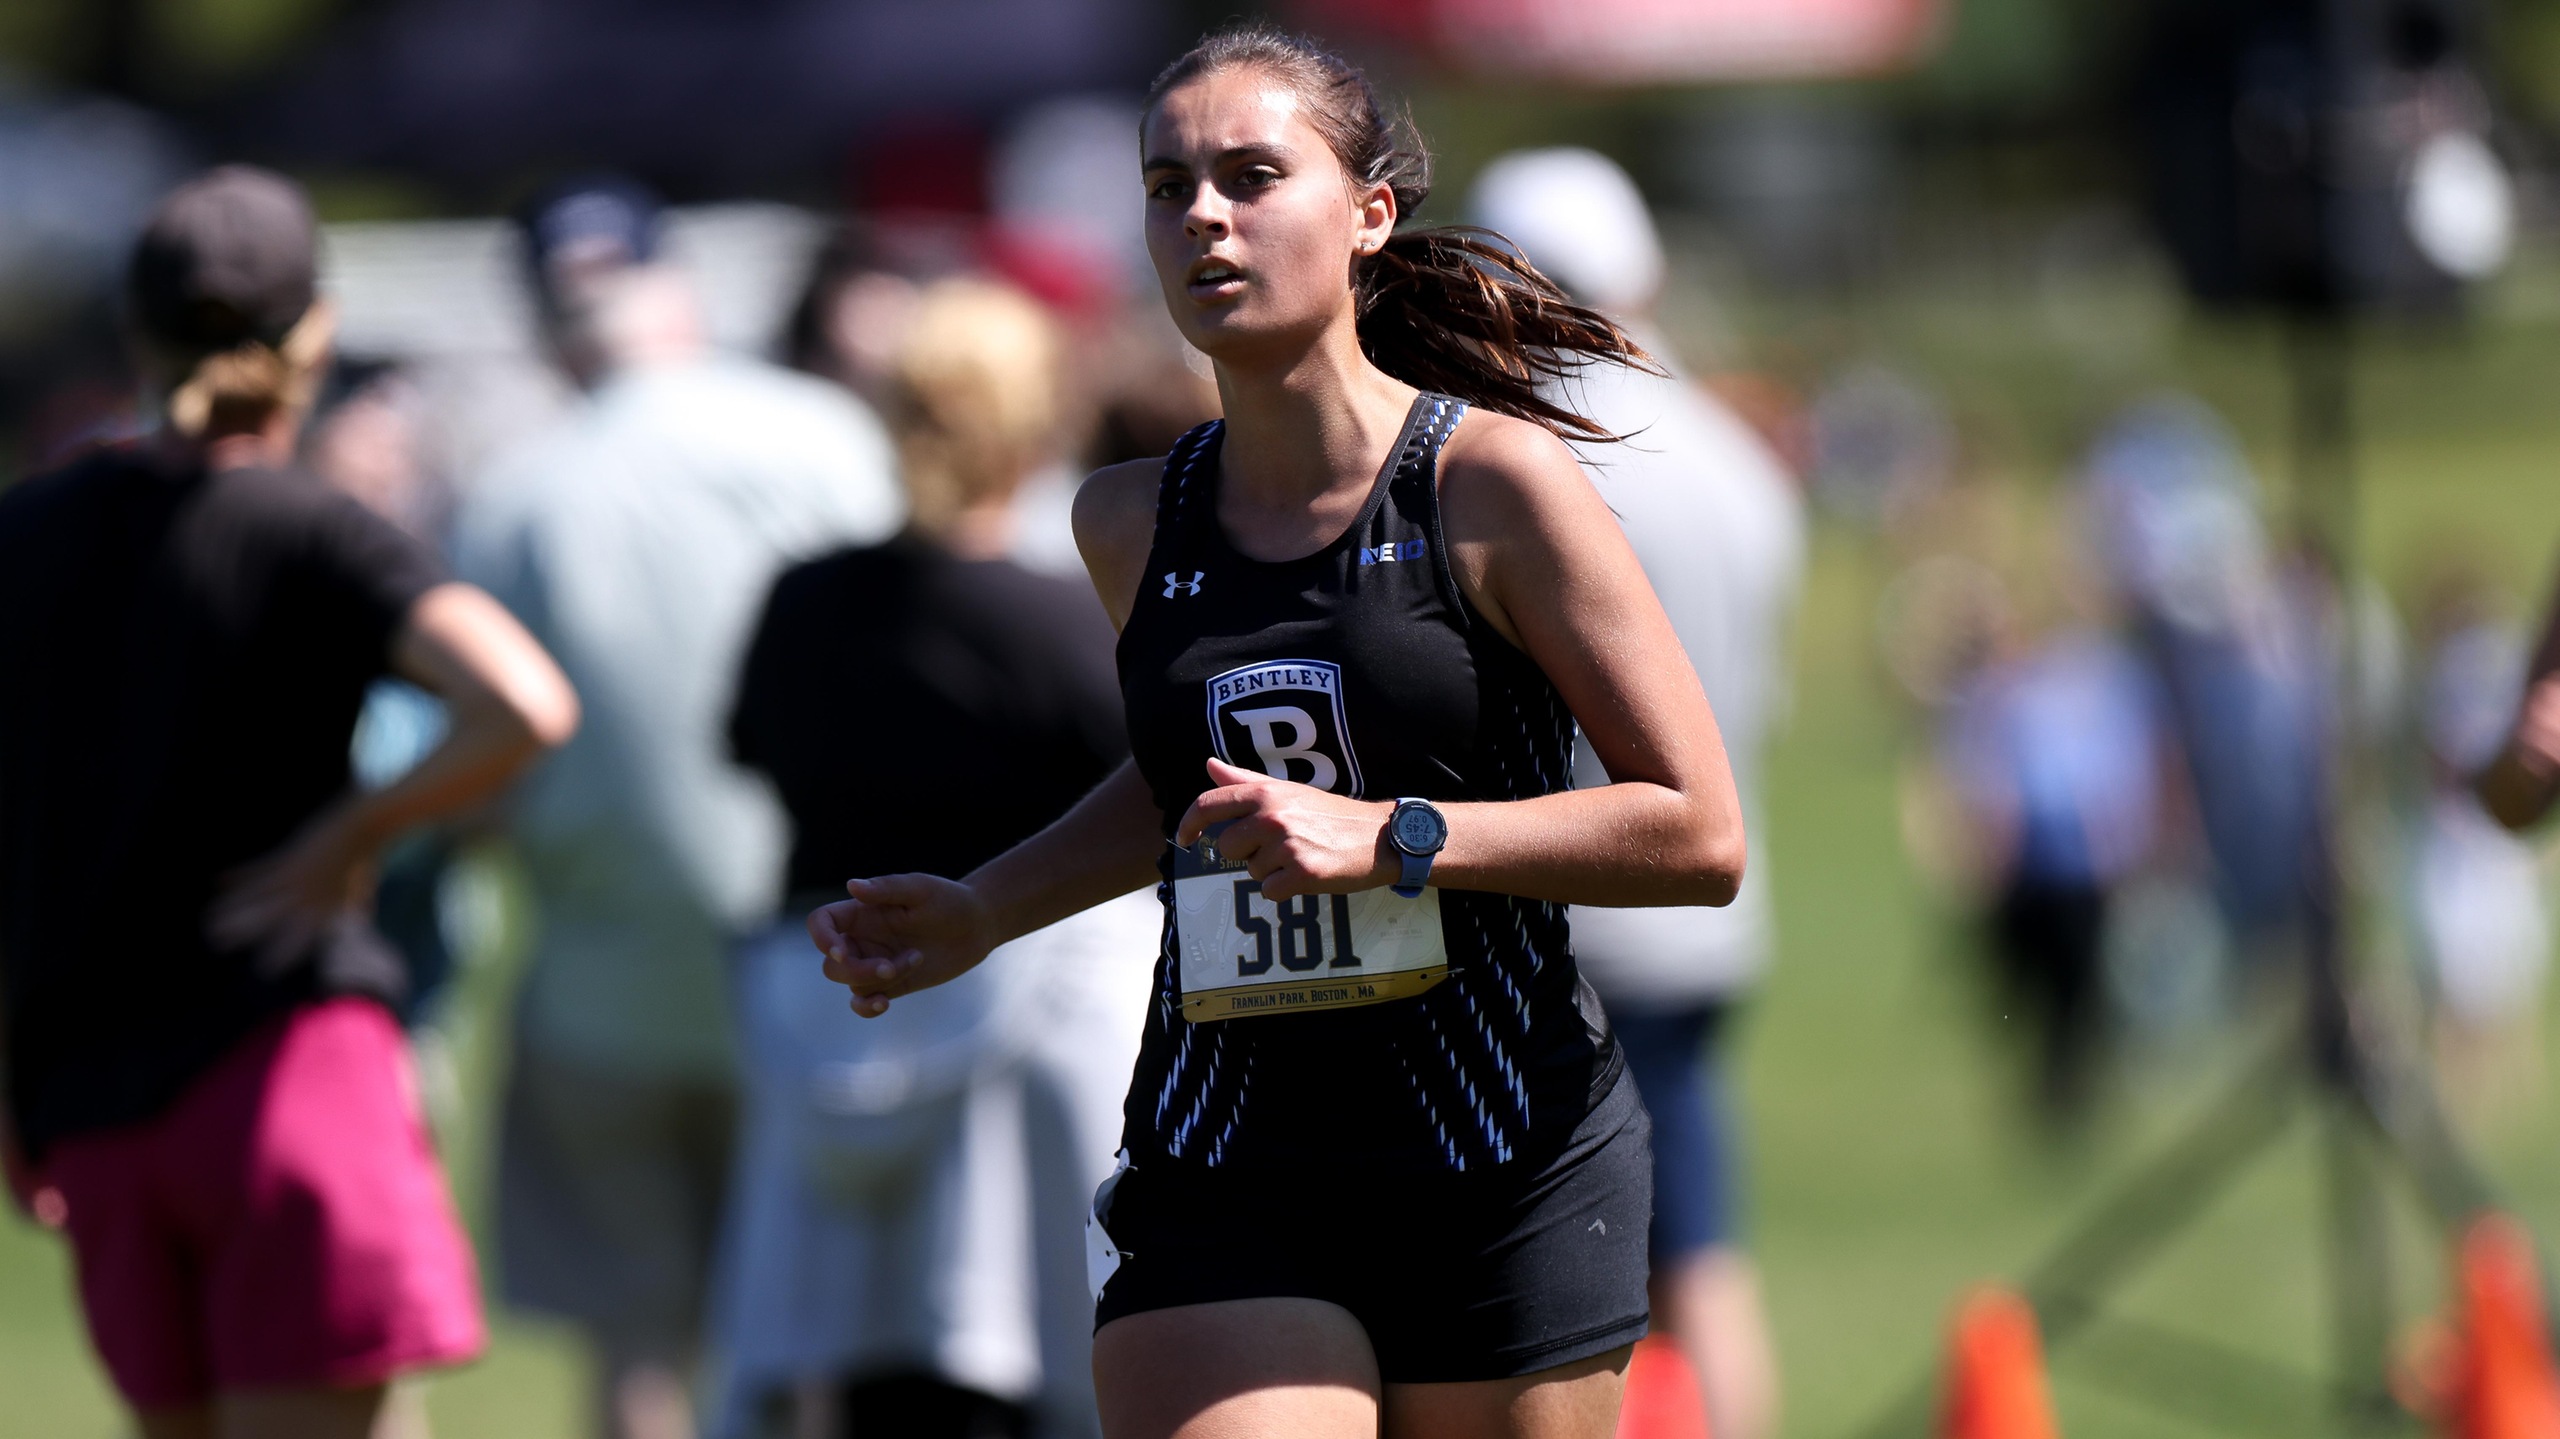 Women’s Cross Country Places at 11th at UMass Dartmouth Invitational